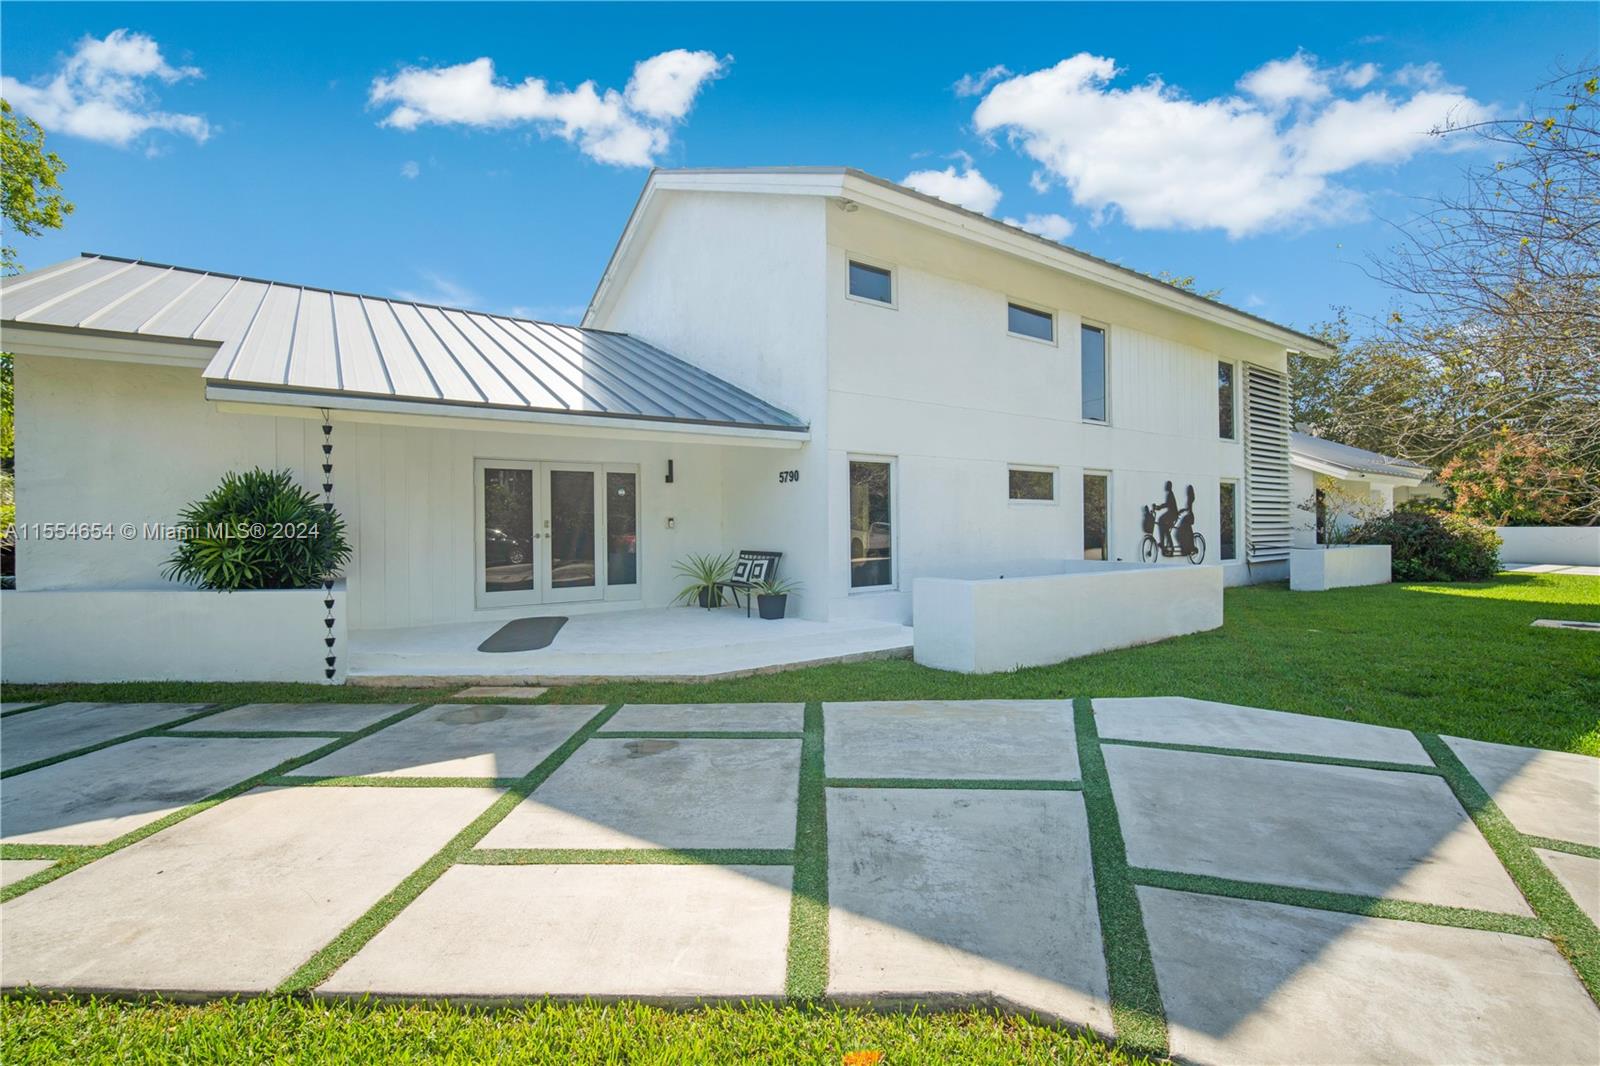 5790 Sw 84th St St, South Miami, Miami-Dade County, Florida - 6 Bedrooms  
5 Bathrooms - 